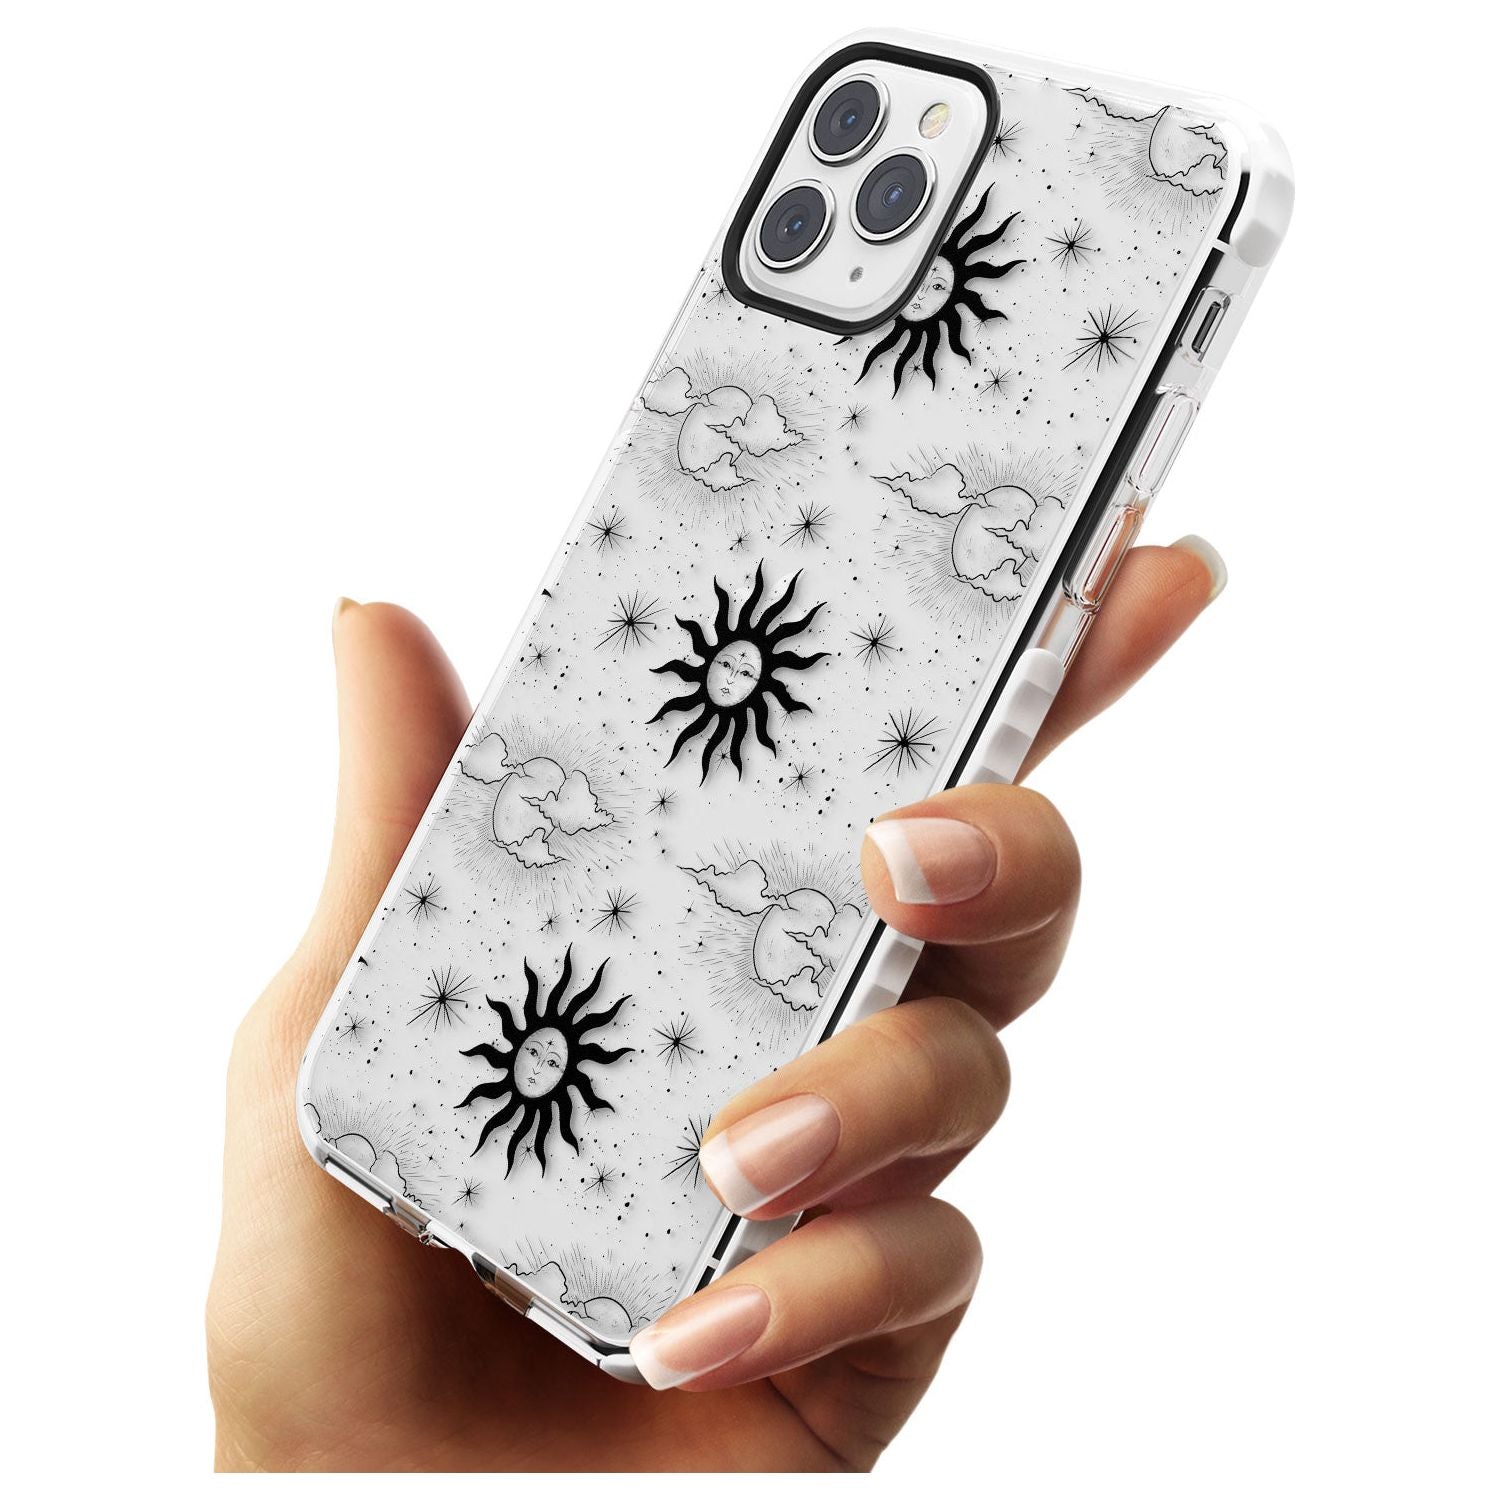 Suns & Clouds Vintage Astrological Impact Phone Case for iPhone 11 Pro Max